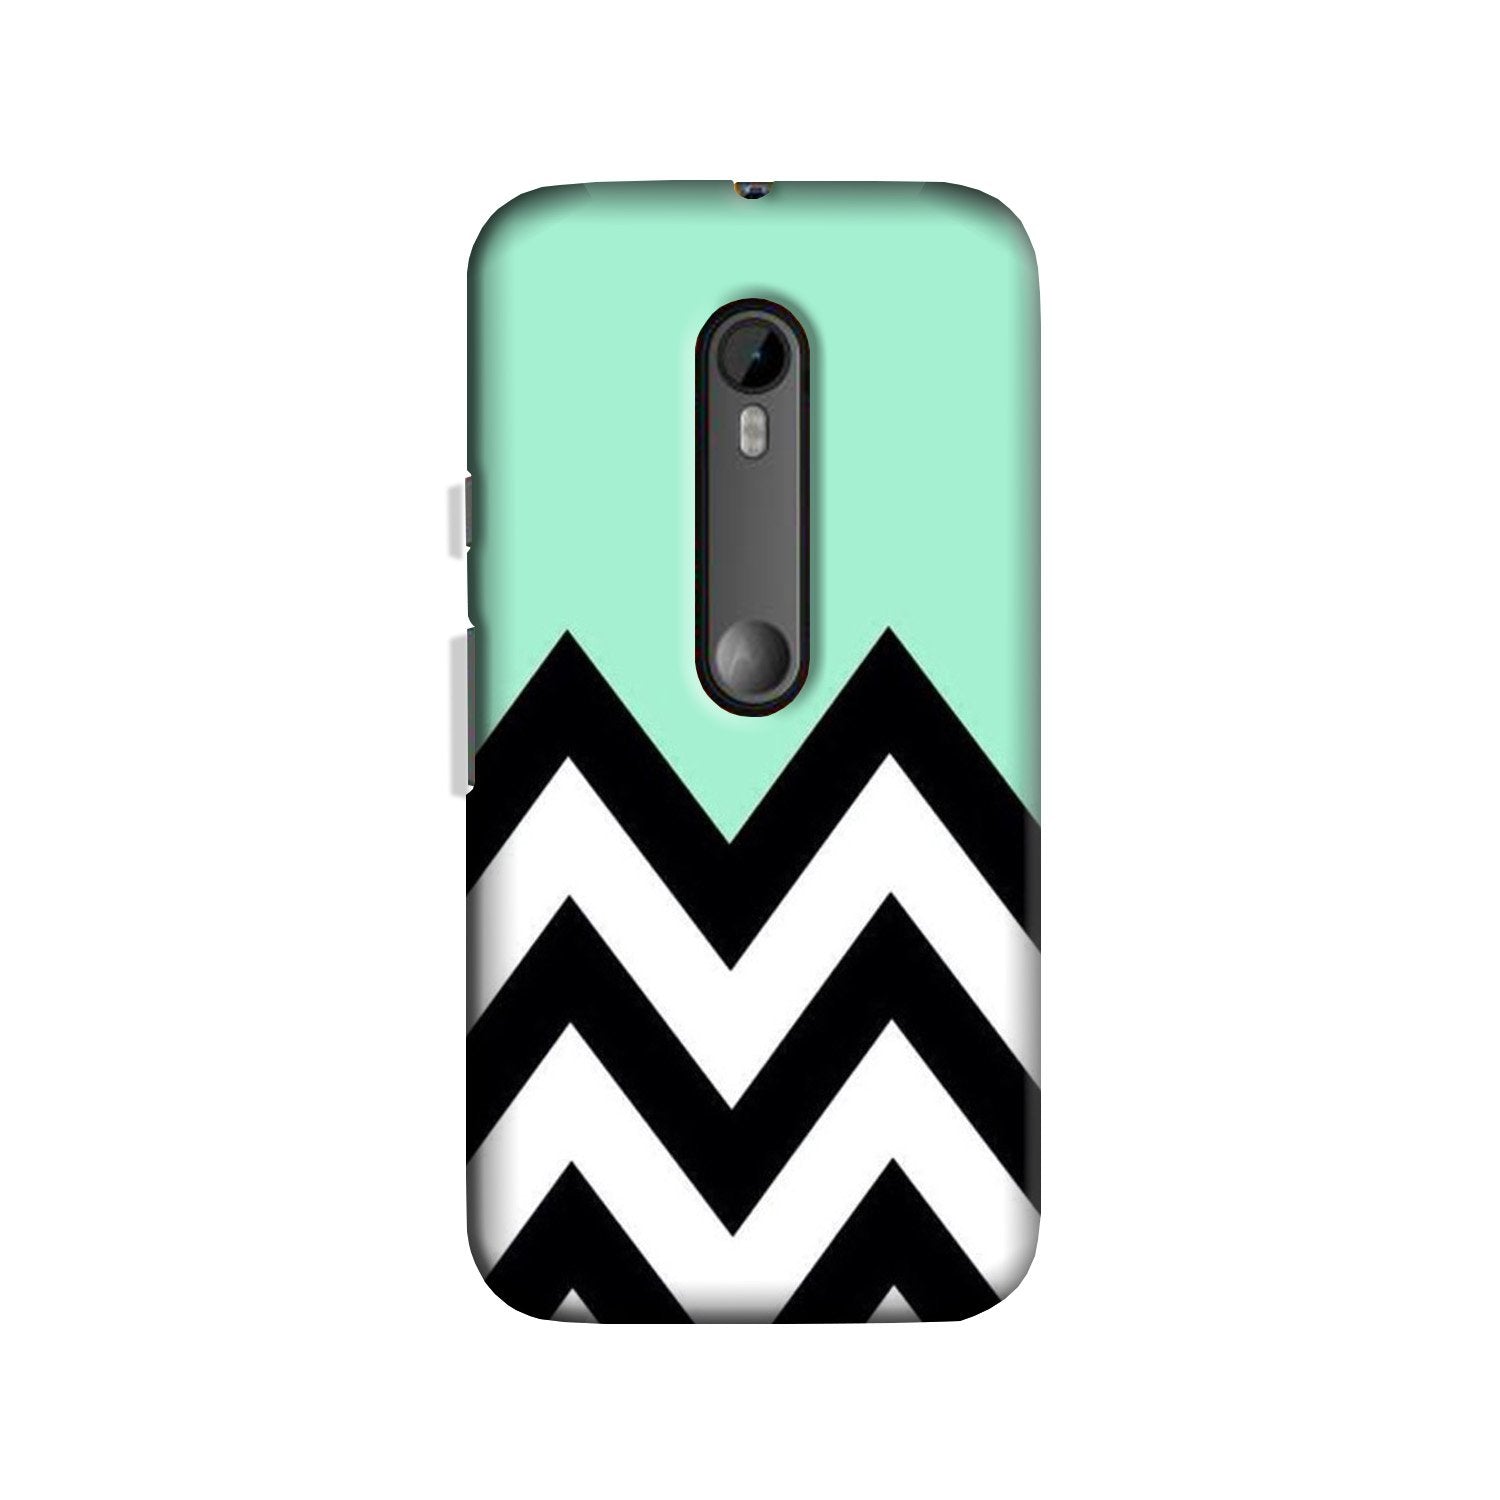 Pattern Case for Moto X Force